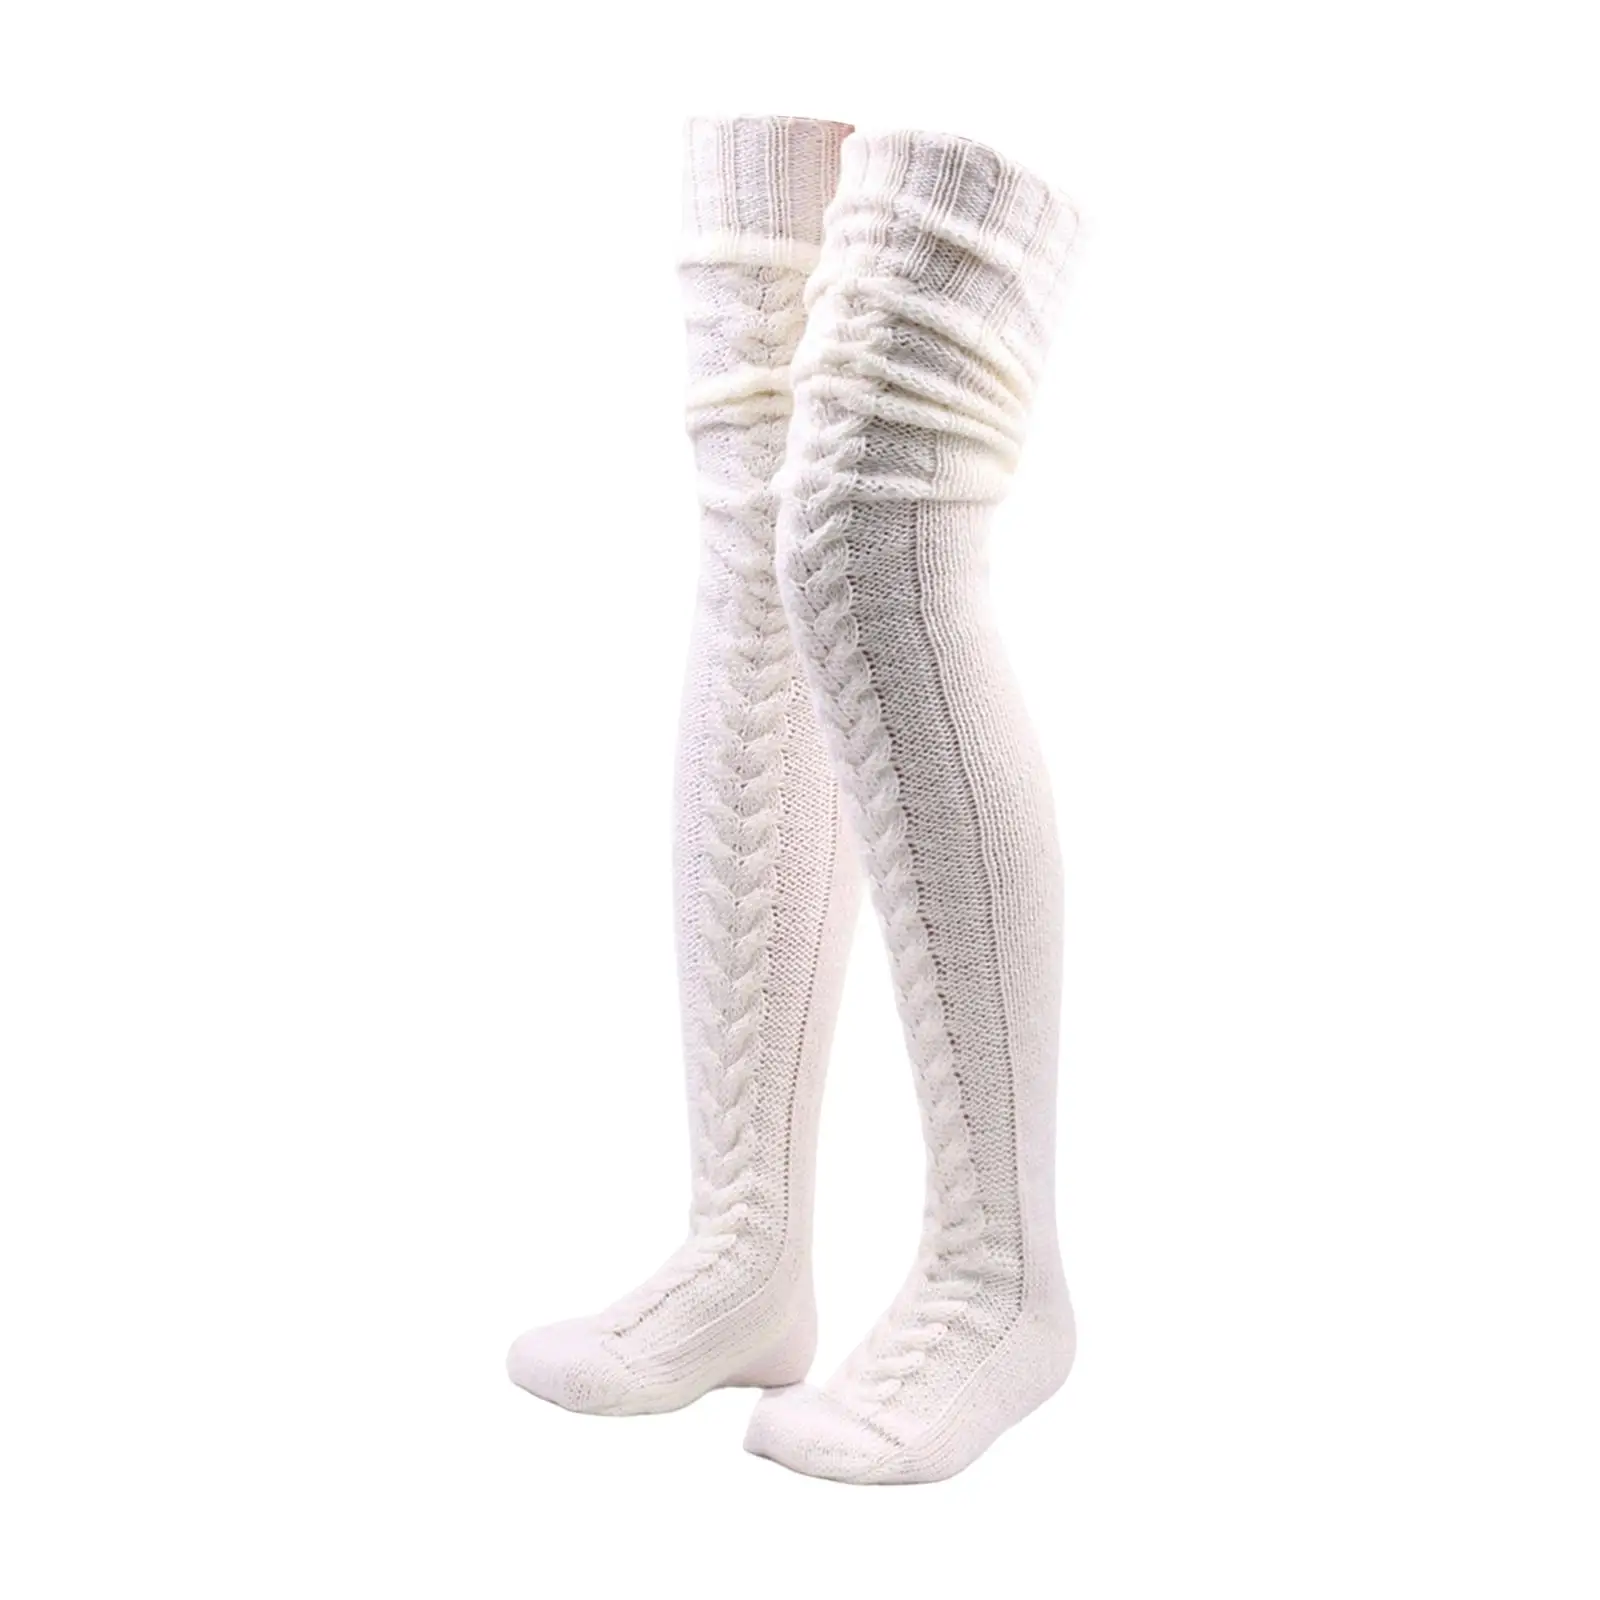 Cable Knitted Thigh High Socks Legging Stocking Birthday Gift, Cosplay